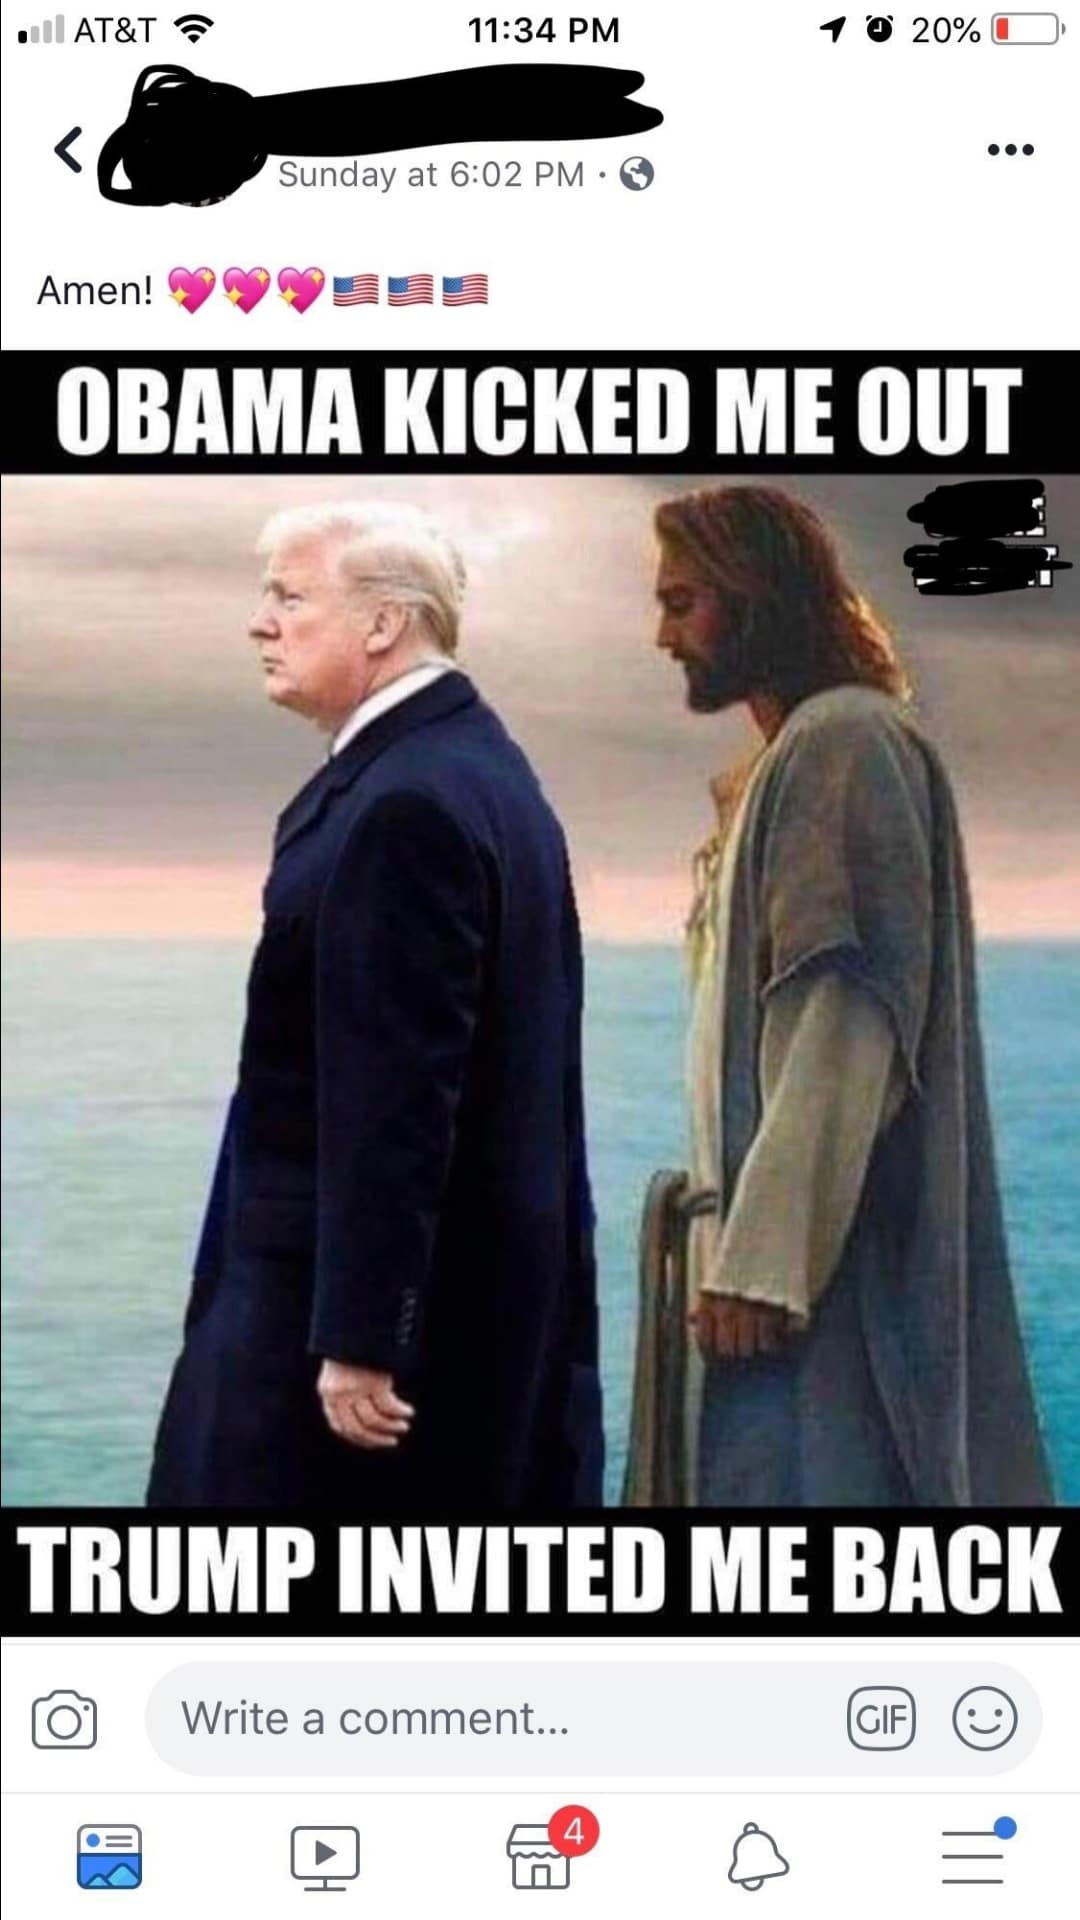 political political-memes political text: AT&T Ameni 11:34 PM Sunday at 6:02 PM • e 0 200/0 CD OBAMA KICKED ME OUT TRUMP INVITED ME BACK Write a comment... CIF 